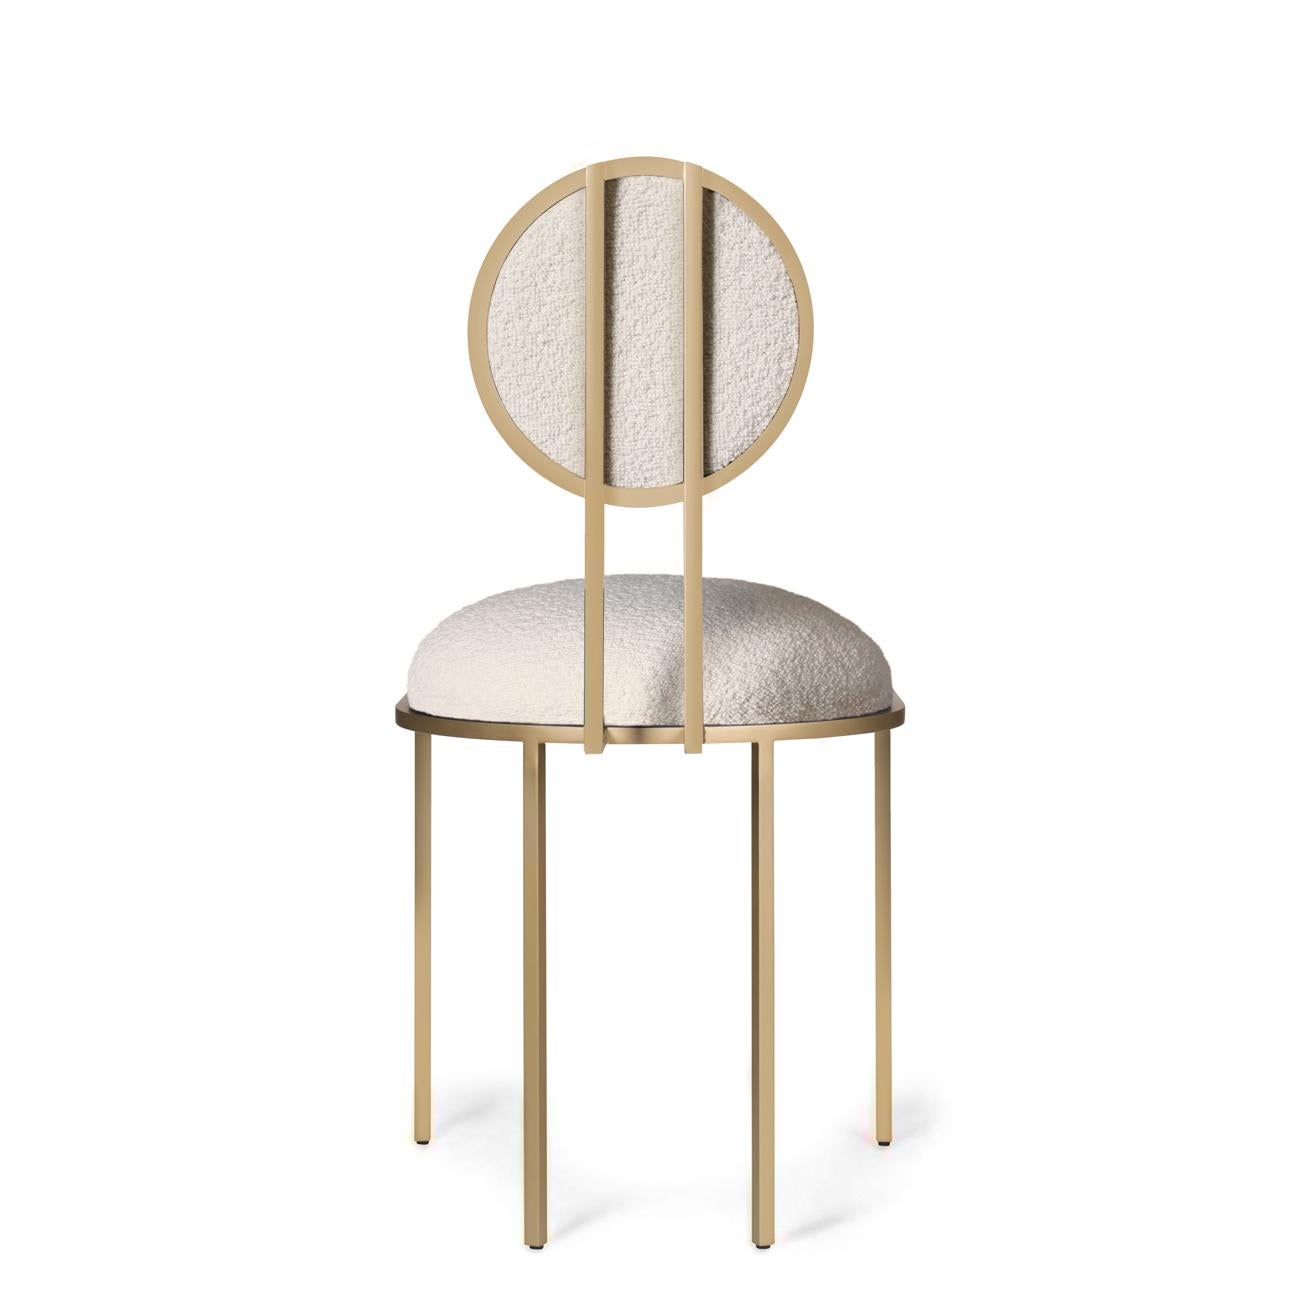 With orbit chairs Lara Bohinc develops her stellar themes, finding inspiration in planetary and lunar orbits, whose gravitationally curved trajectories drive the lines and shapes of the chairs. Constructed from thin square rod, the chairs are